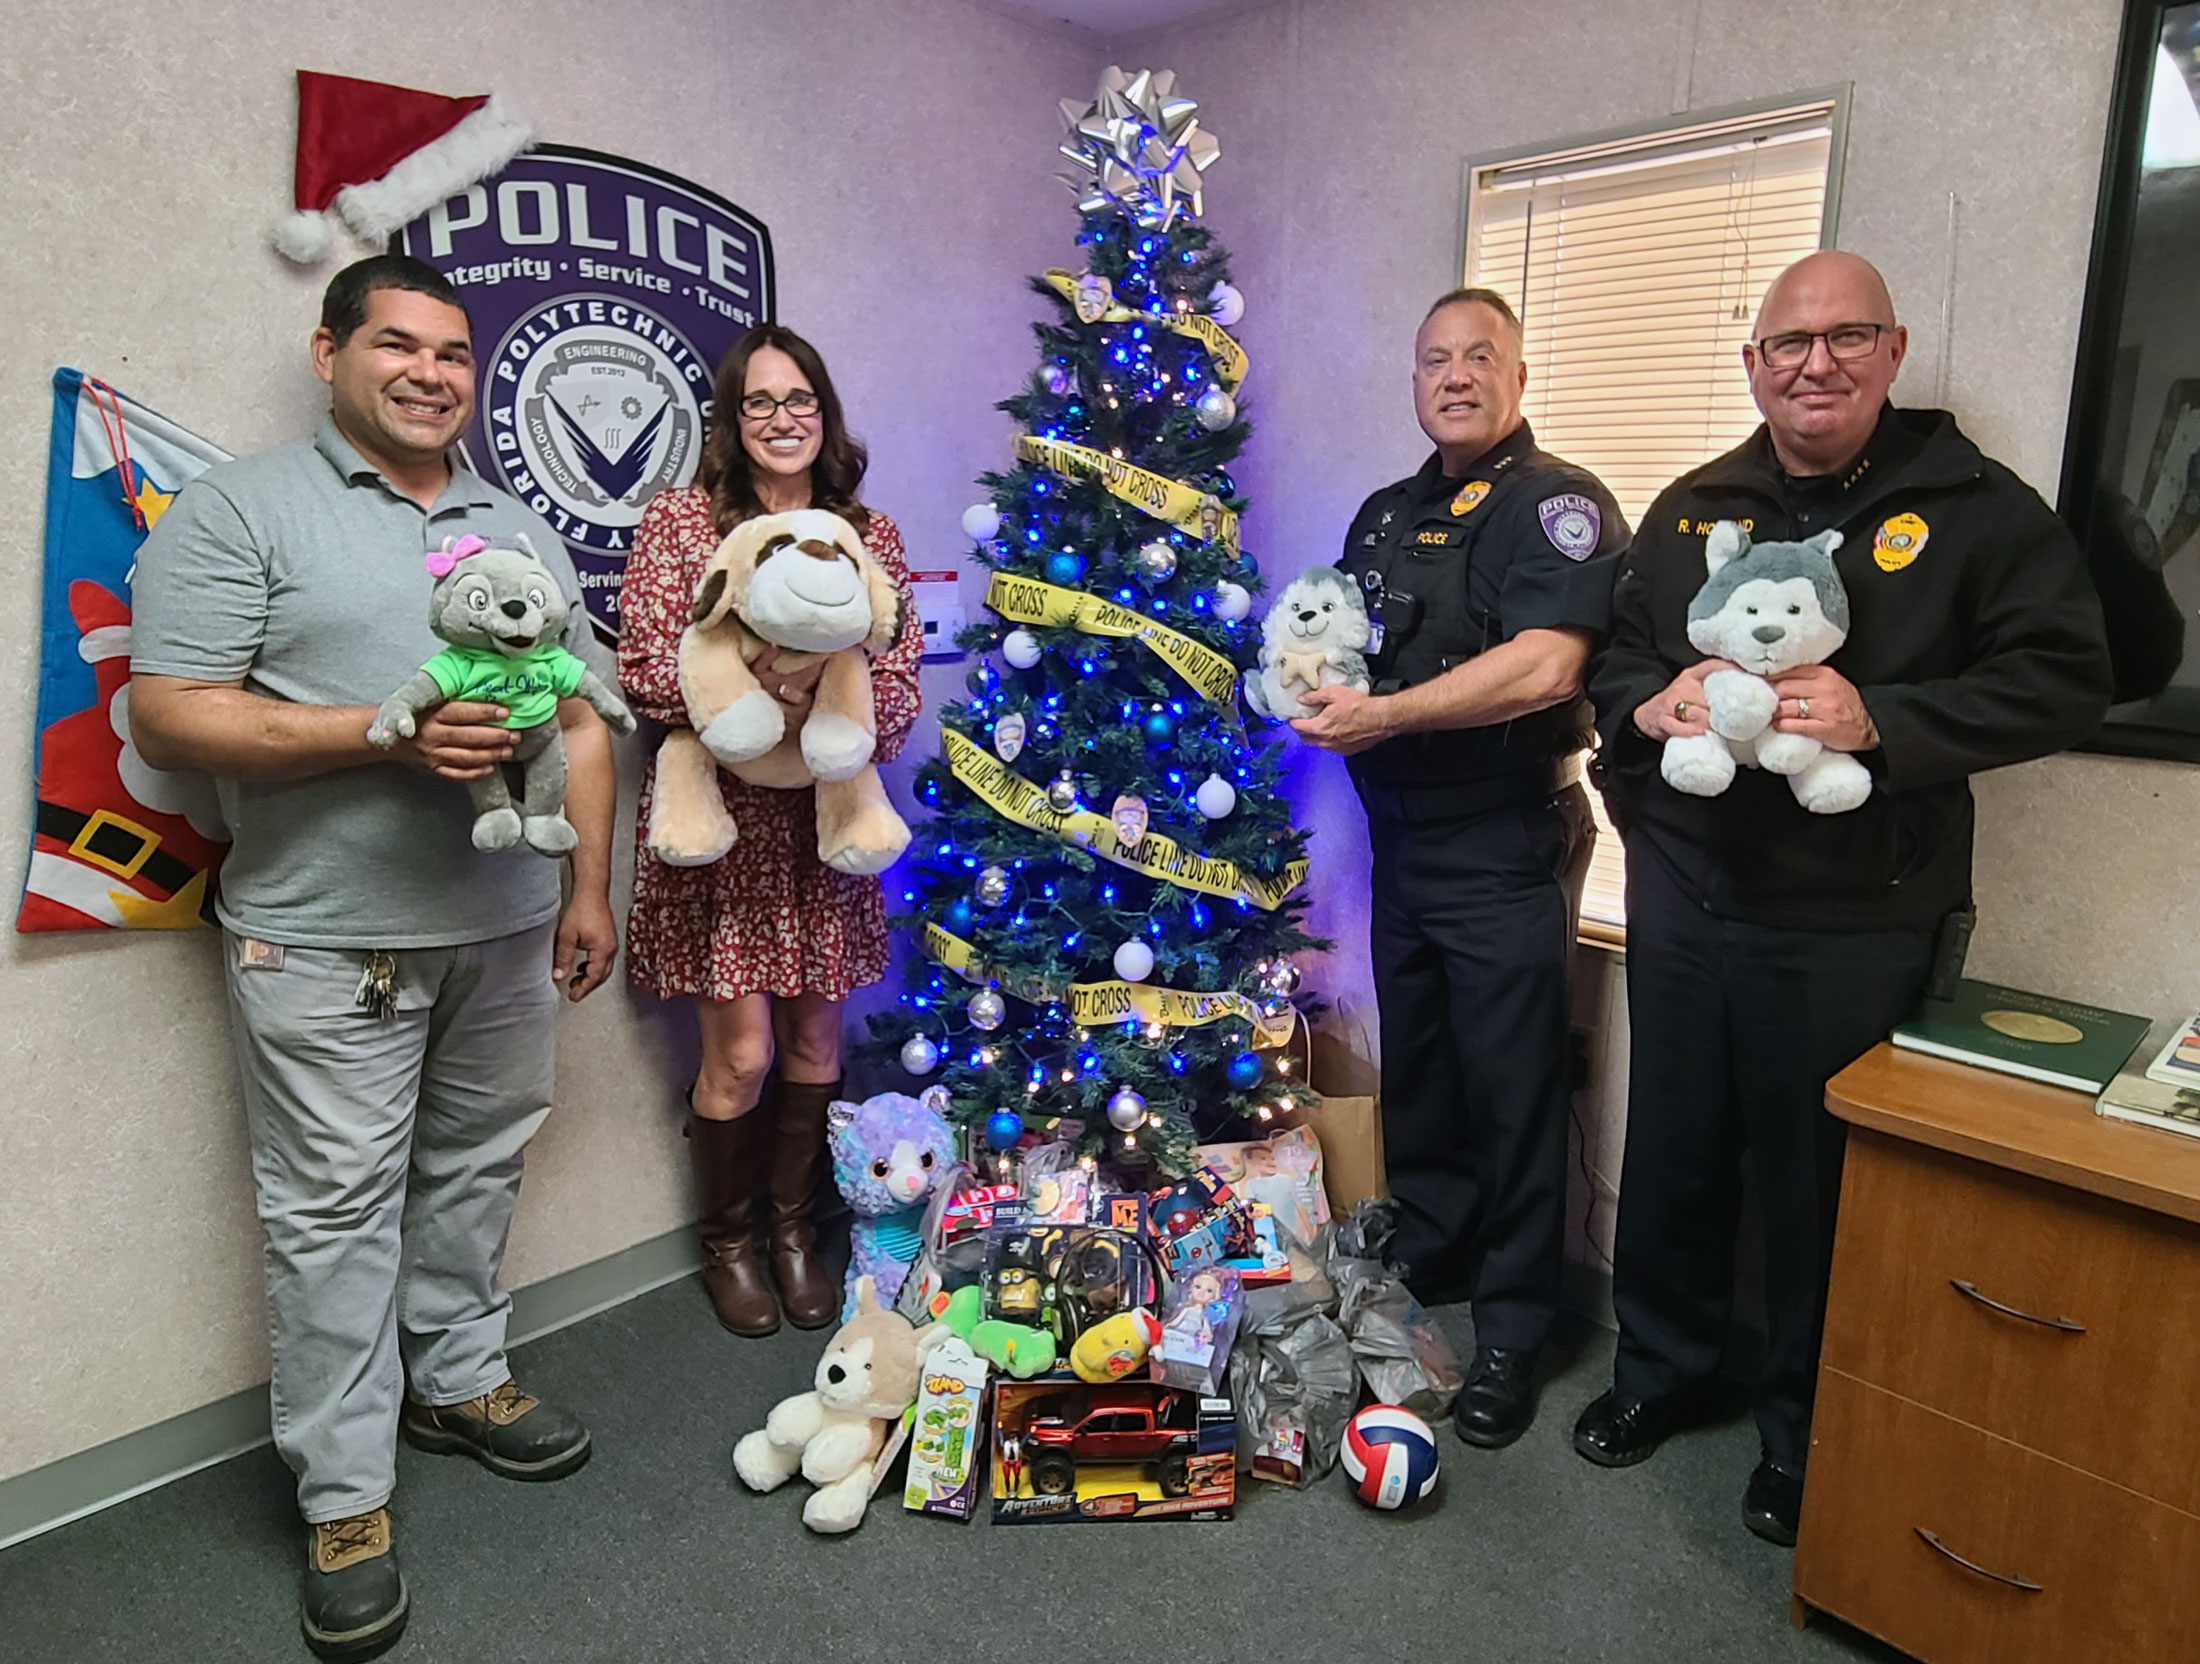 Toys donated to the annual holiday toy drive are shown off